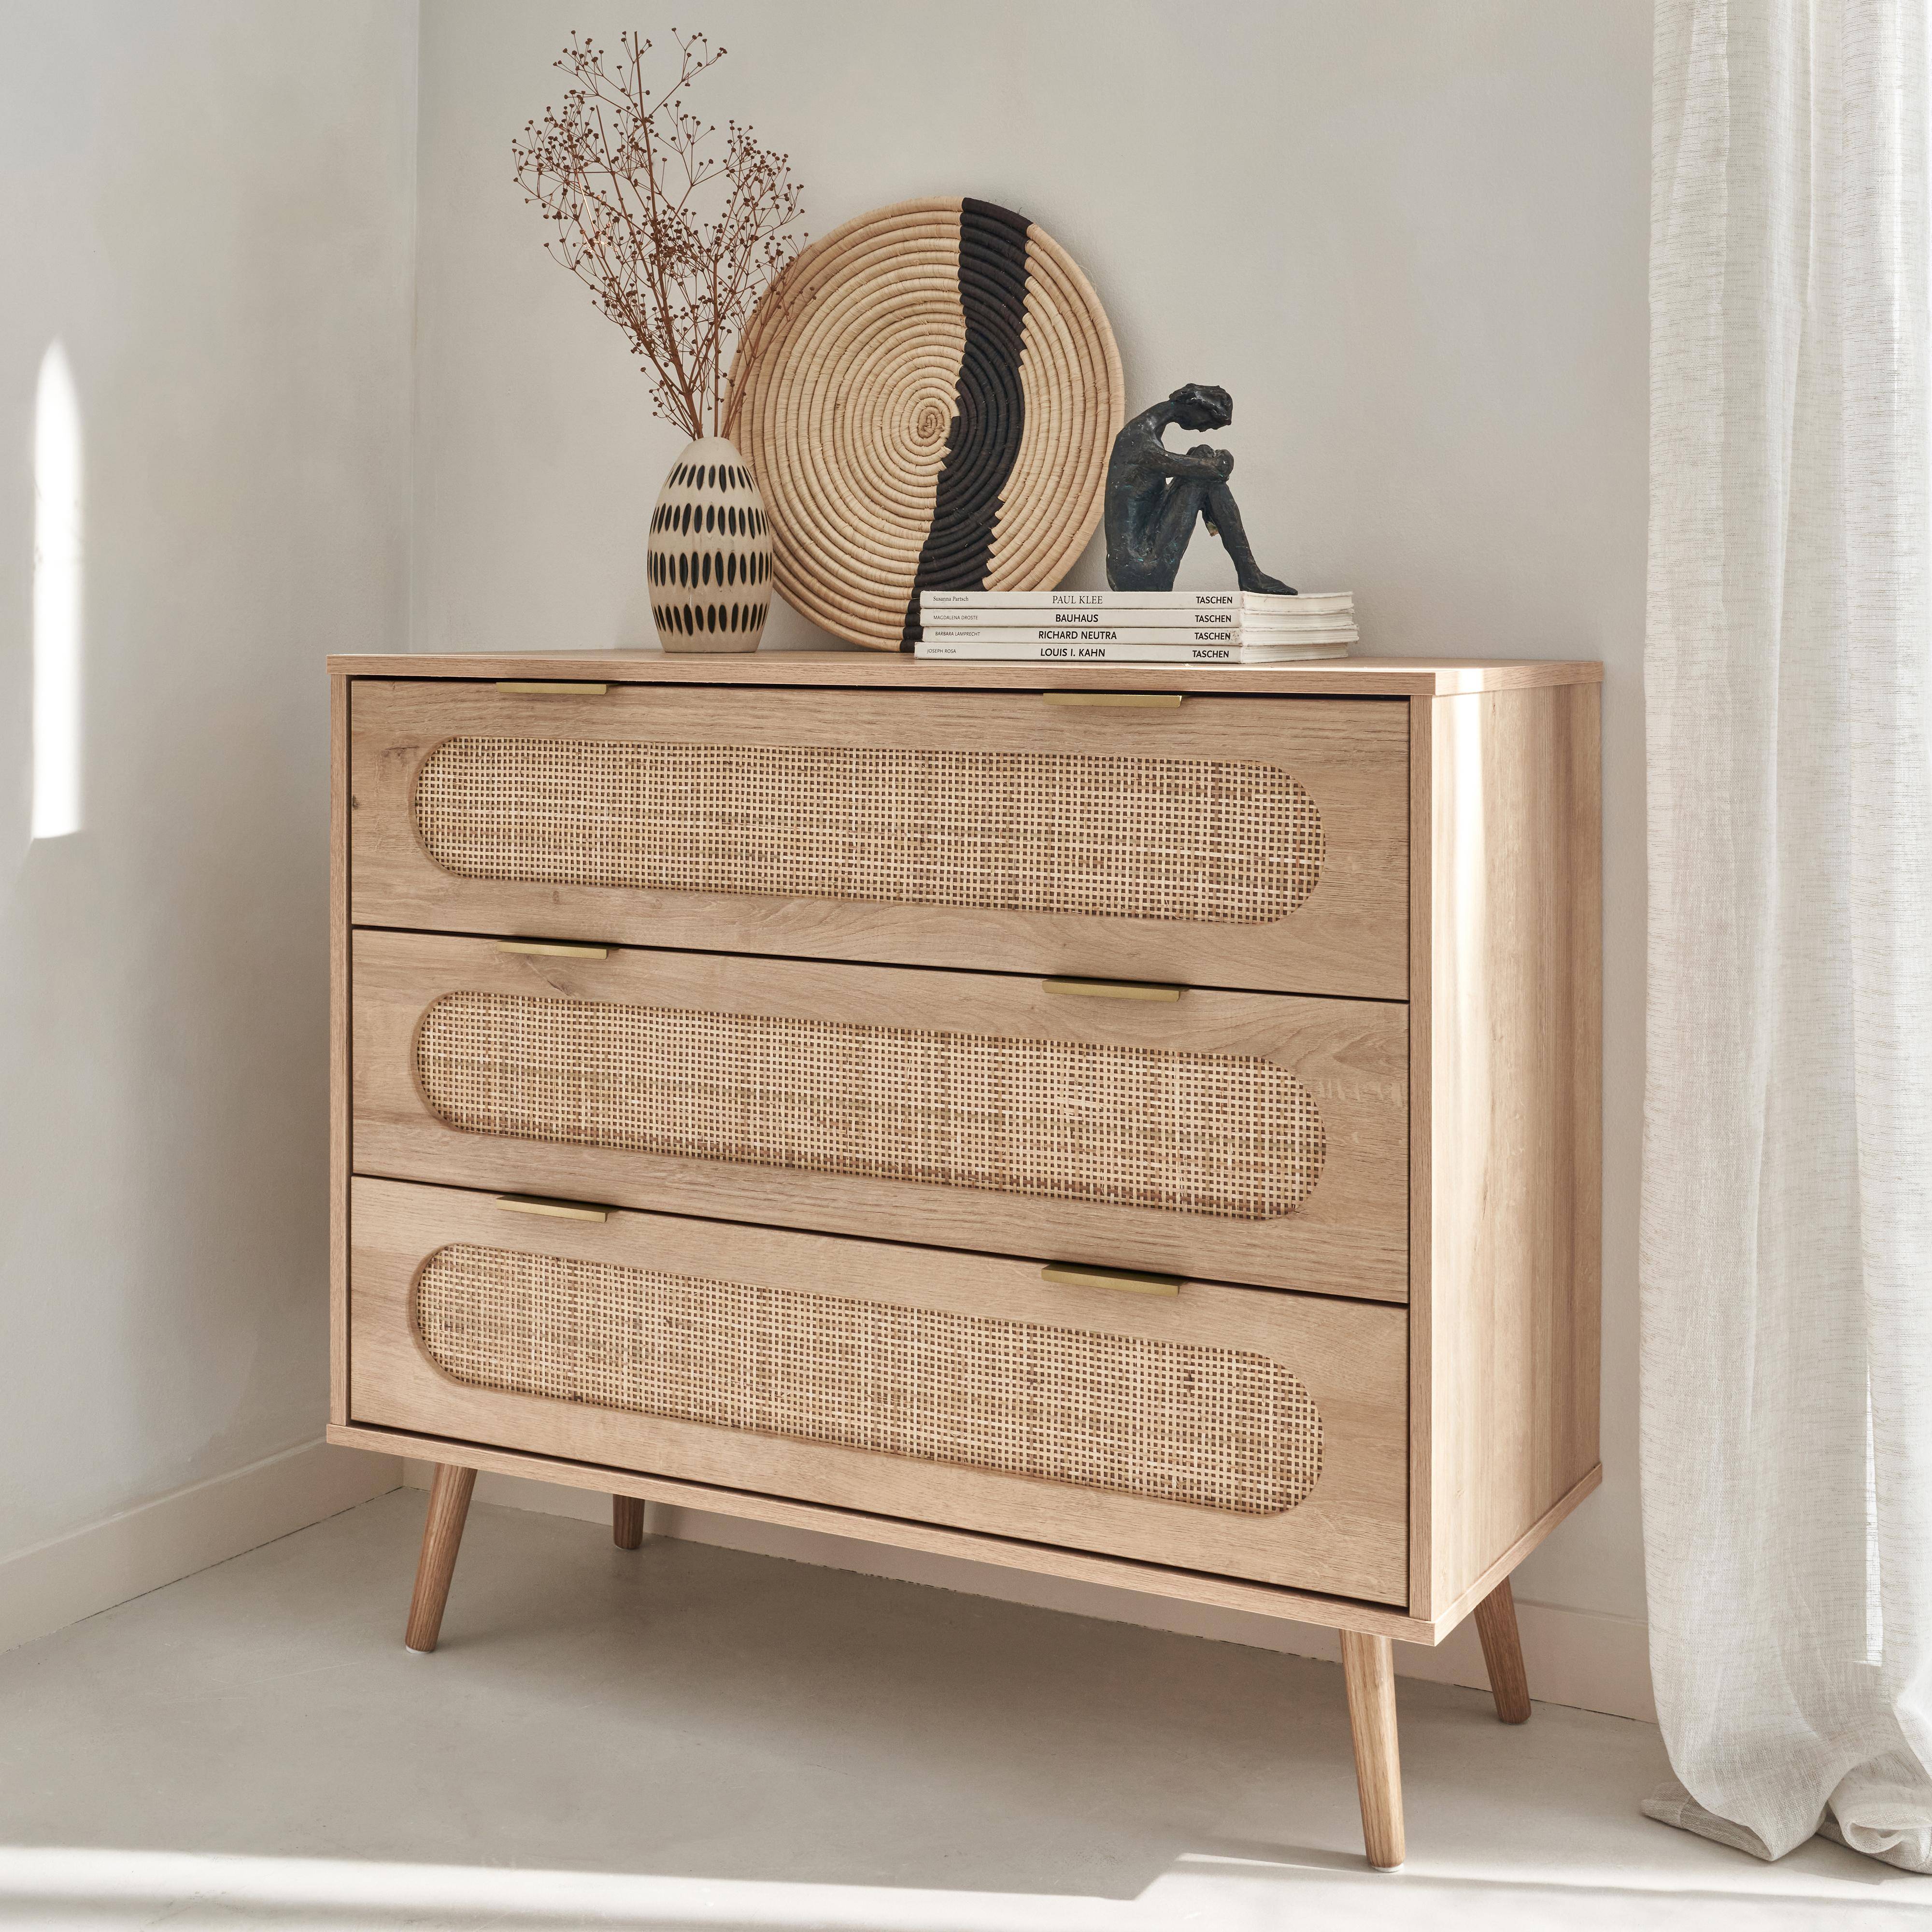 Chest of drawers, Eva, wood decor and rounded cane, 3 drawers L 90 x W 39 x H 79cm Photo2